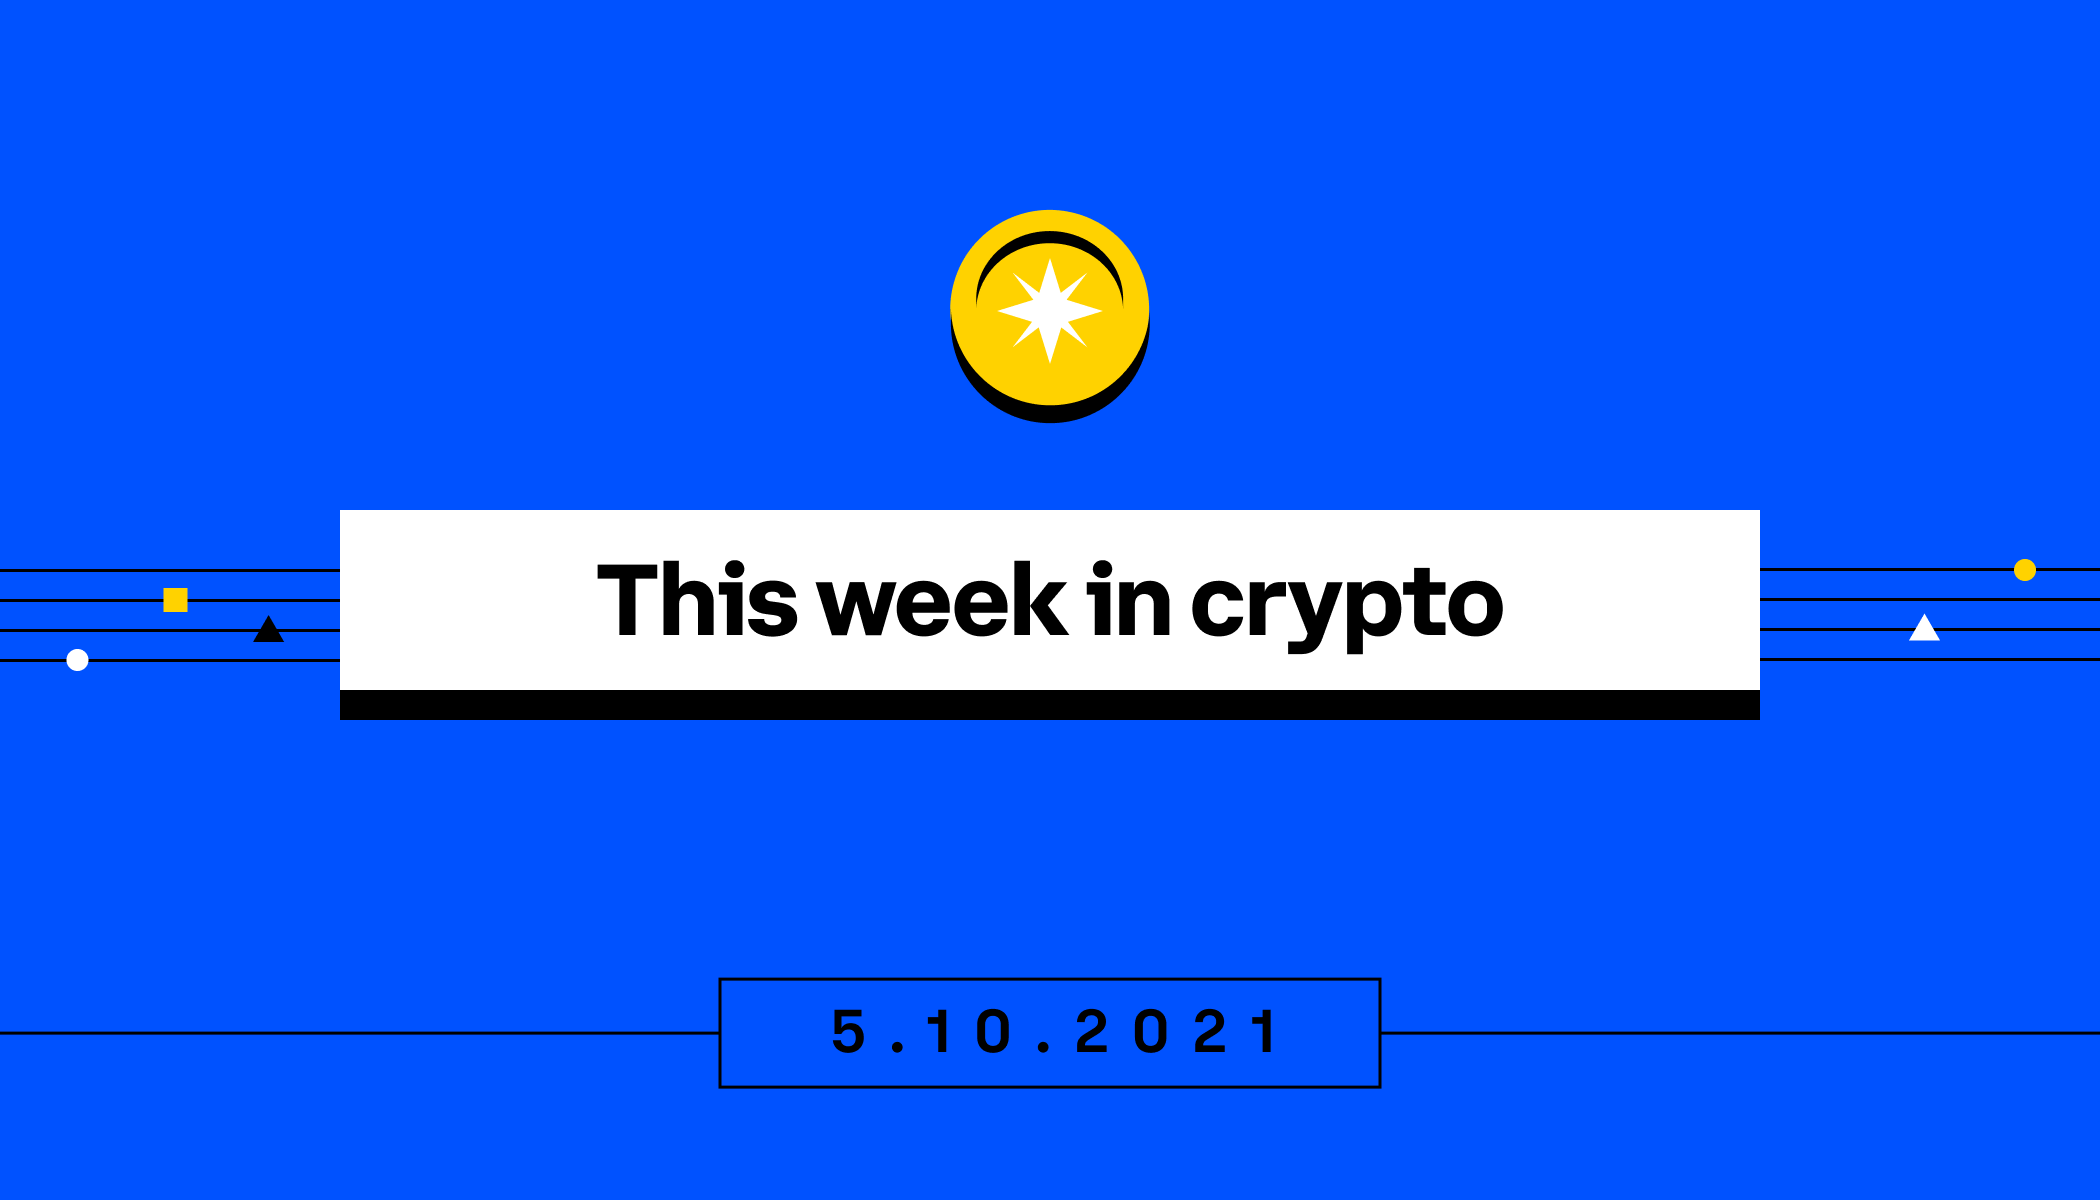 This week in crypto: Ethereum bull run continues as prices ...